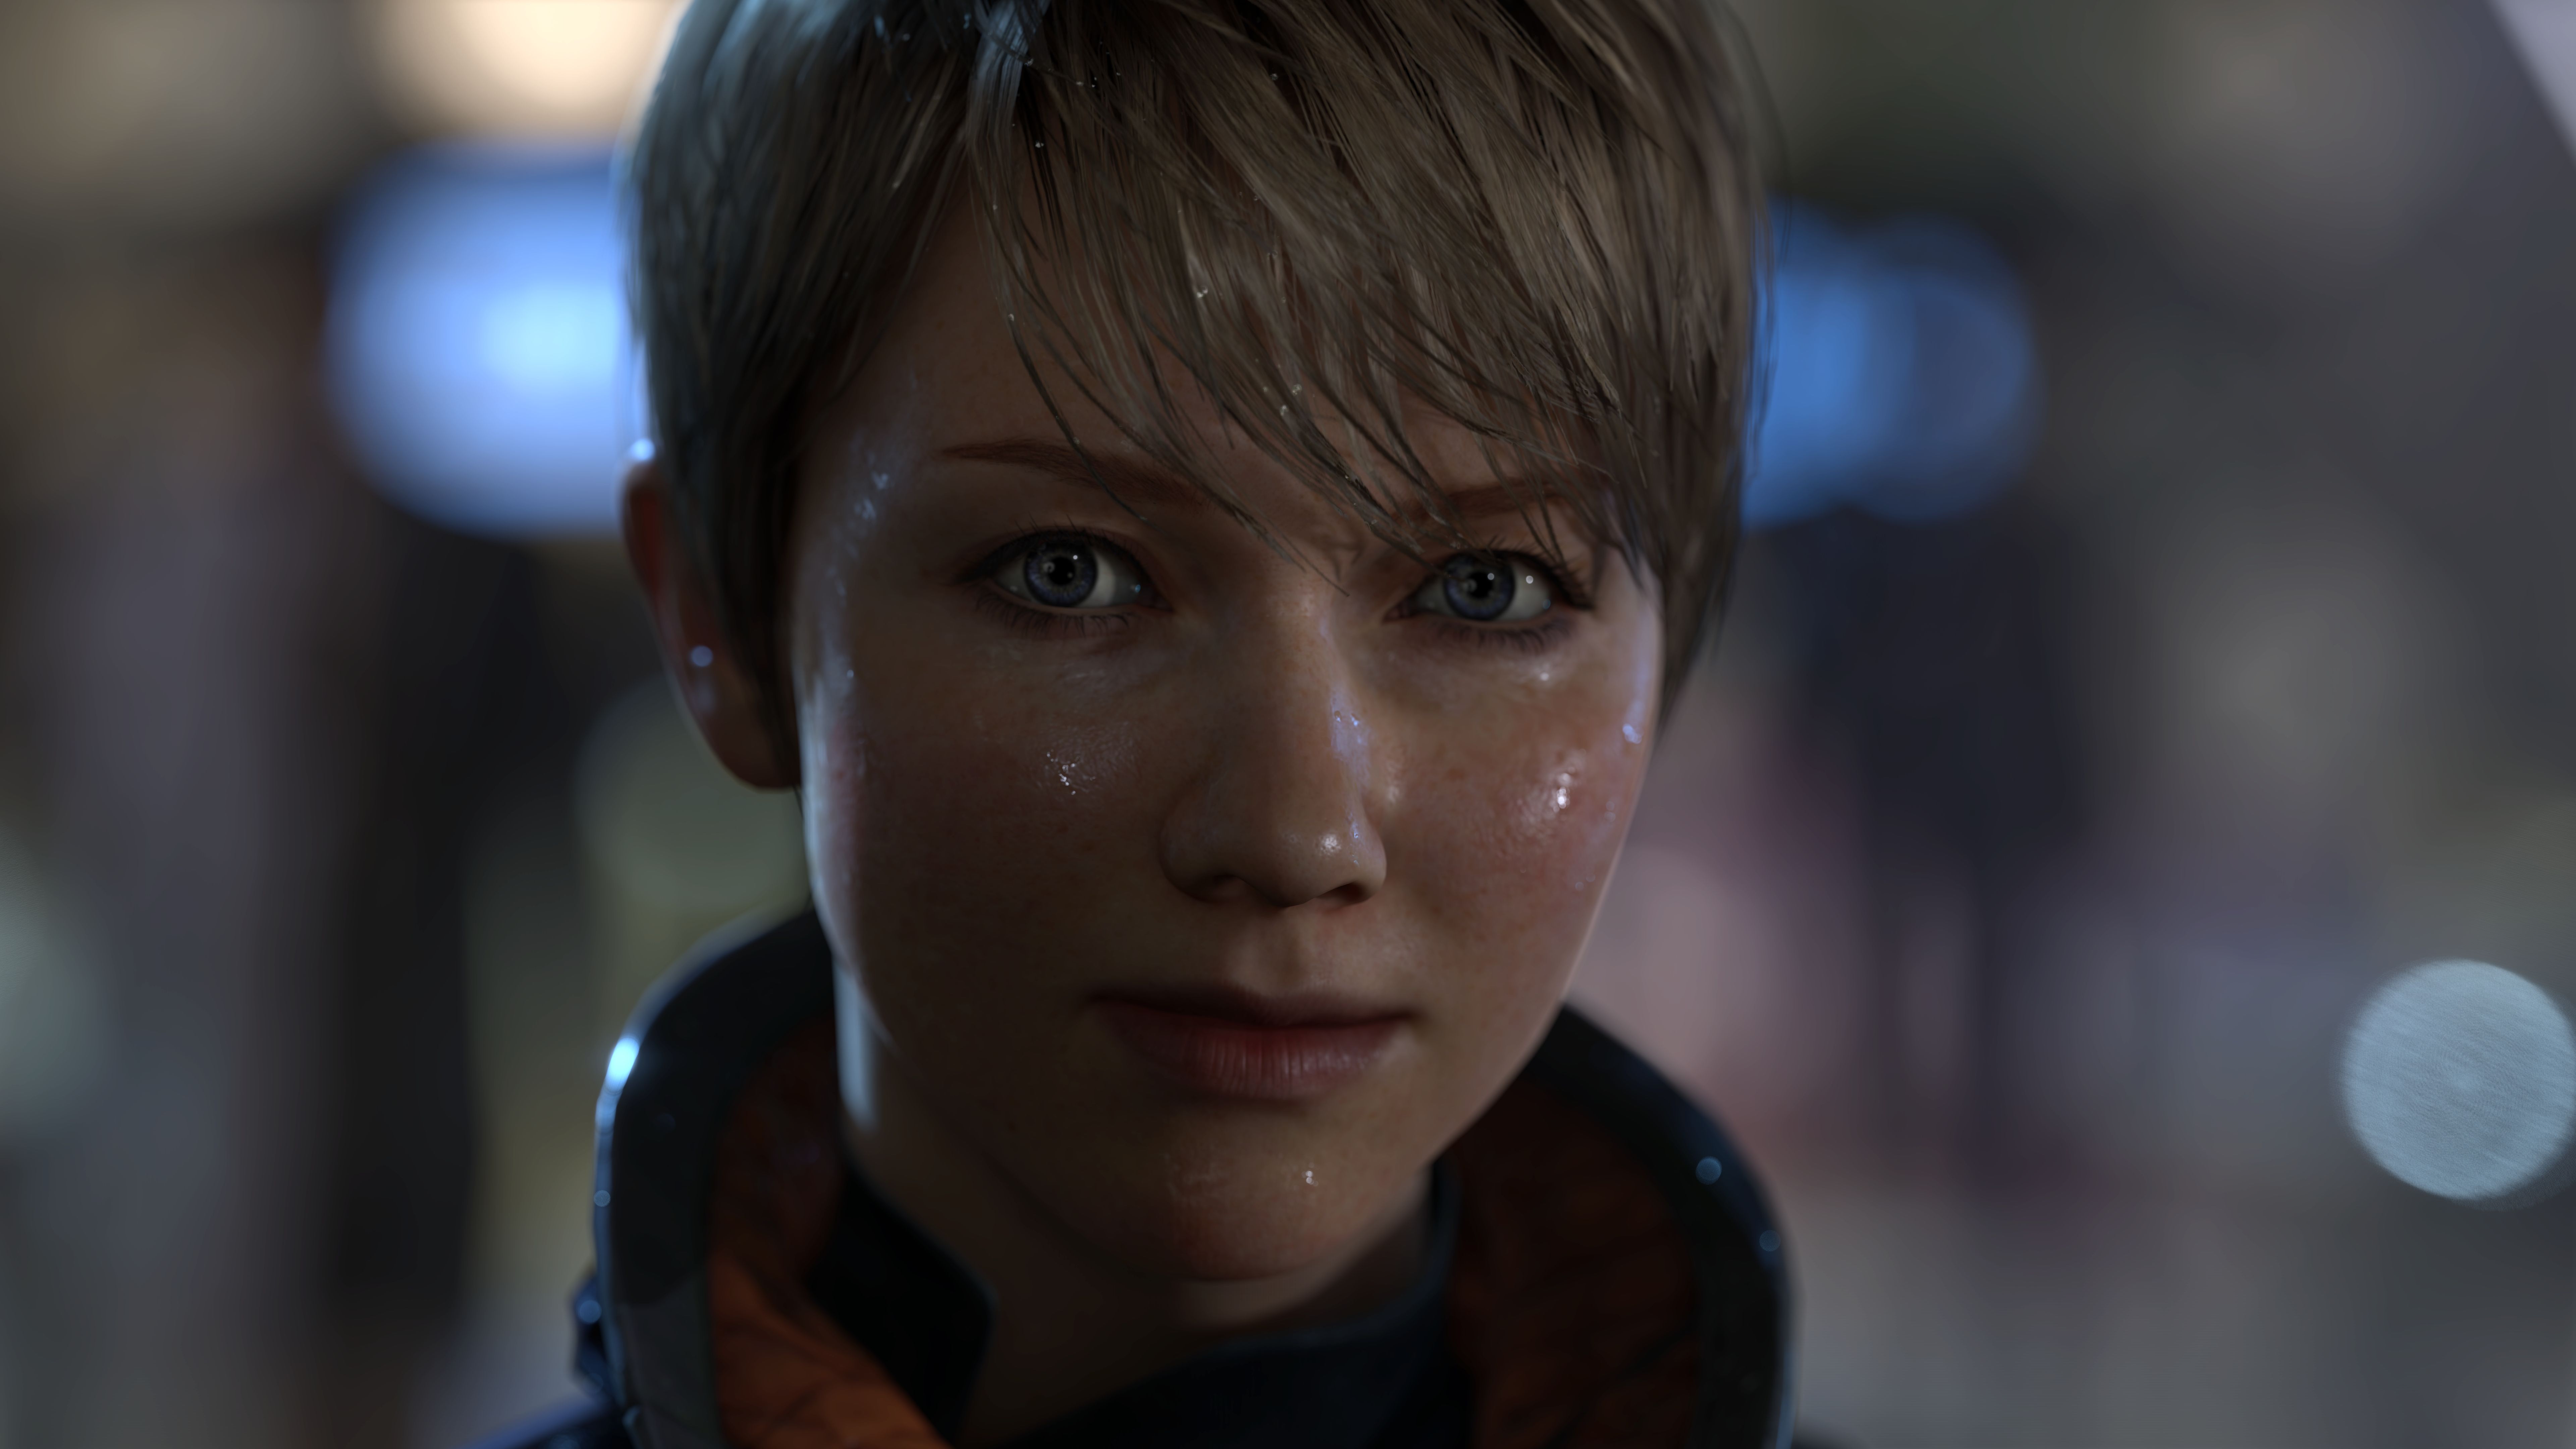 Detroit Become Human - PS5 ULTRA HighGraphics Gameplay [4K 60FPS